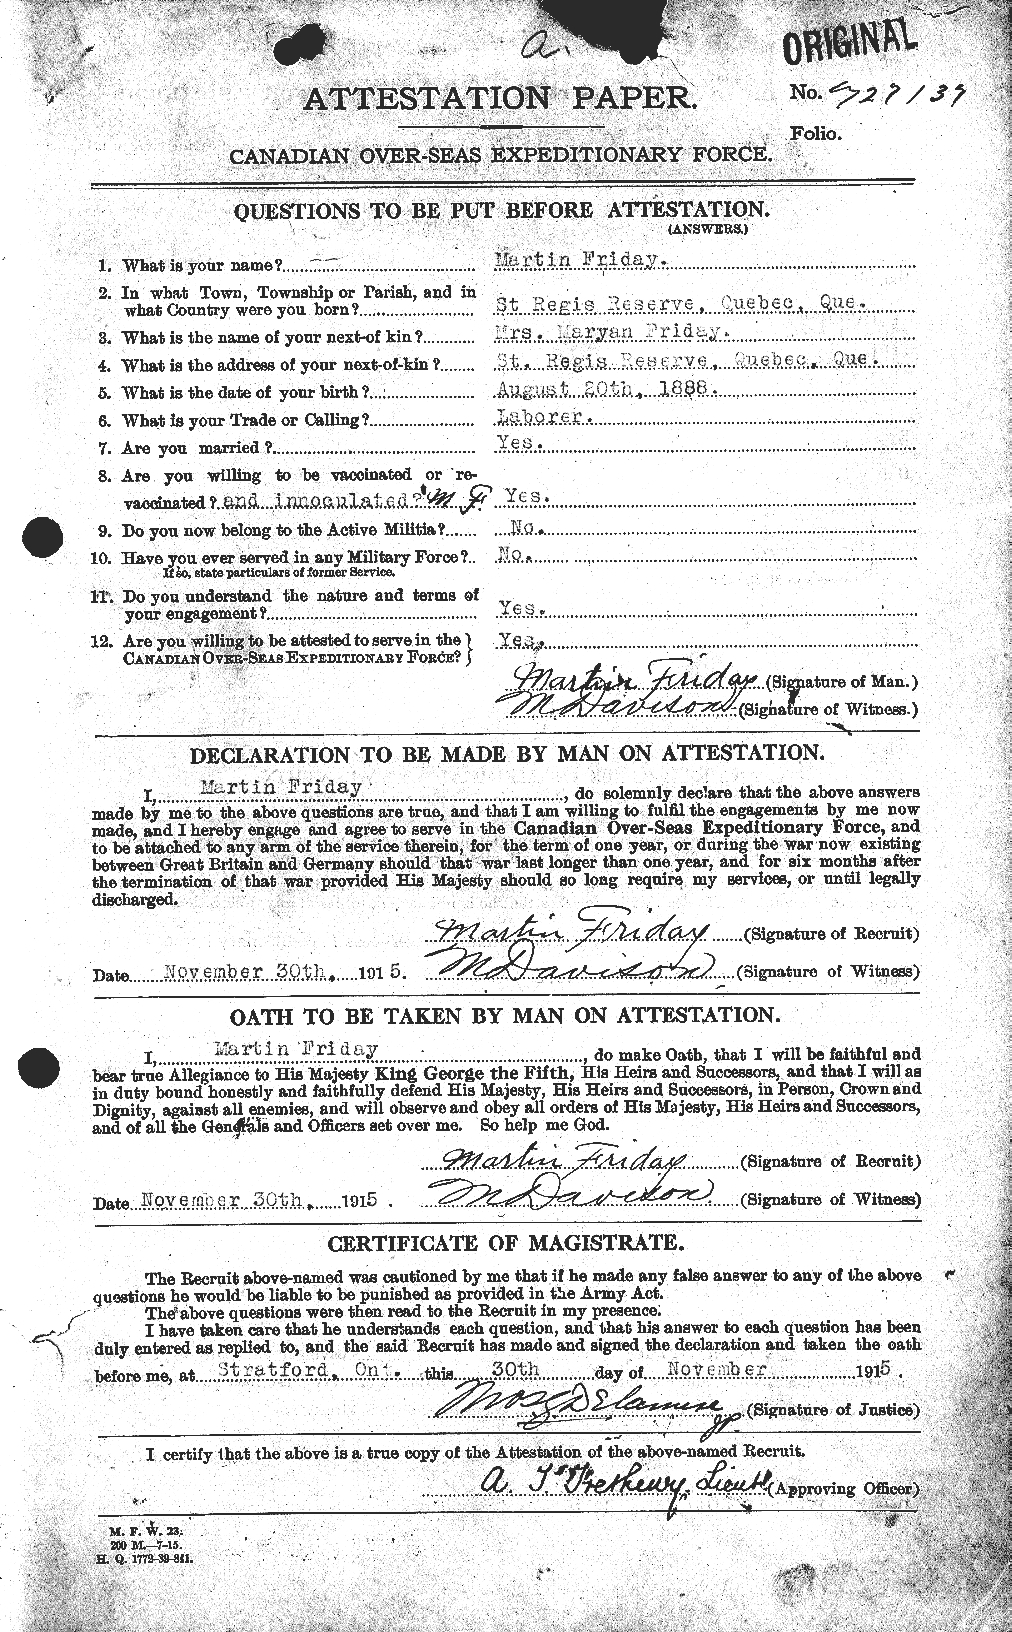 Personnel Records of the First World War - CEF 339729a